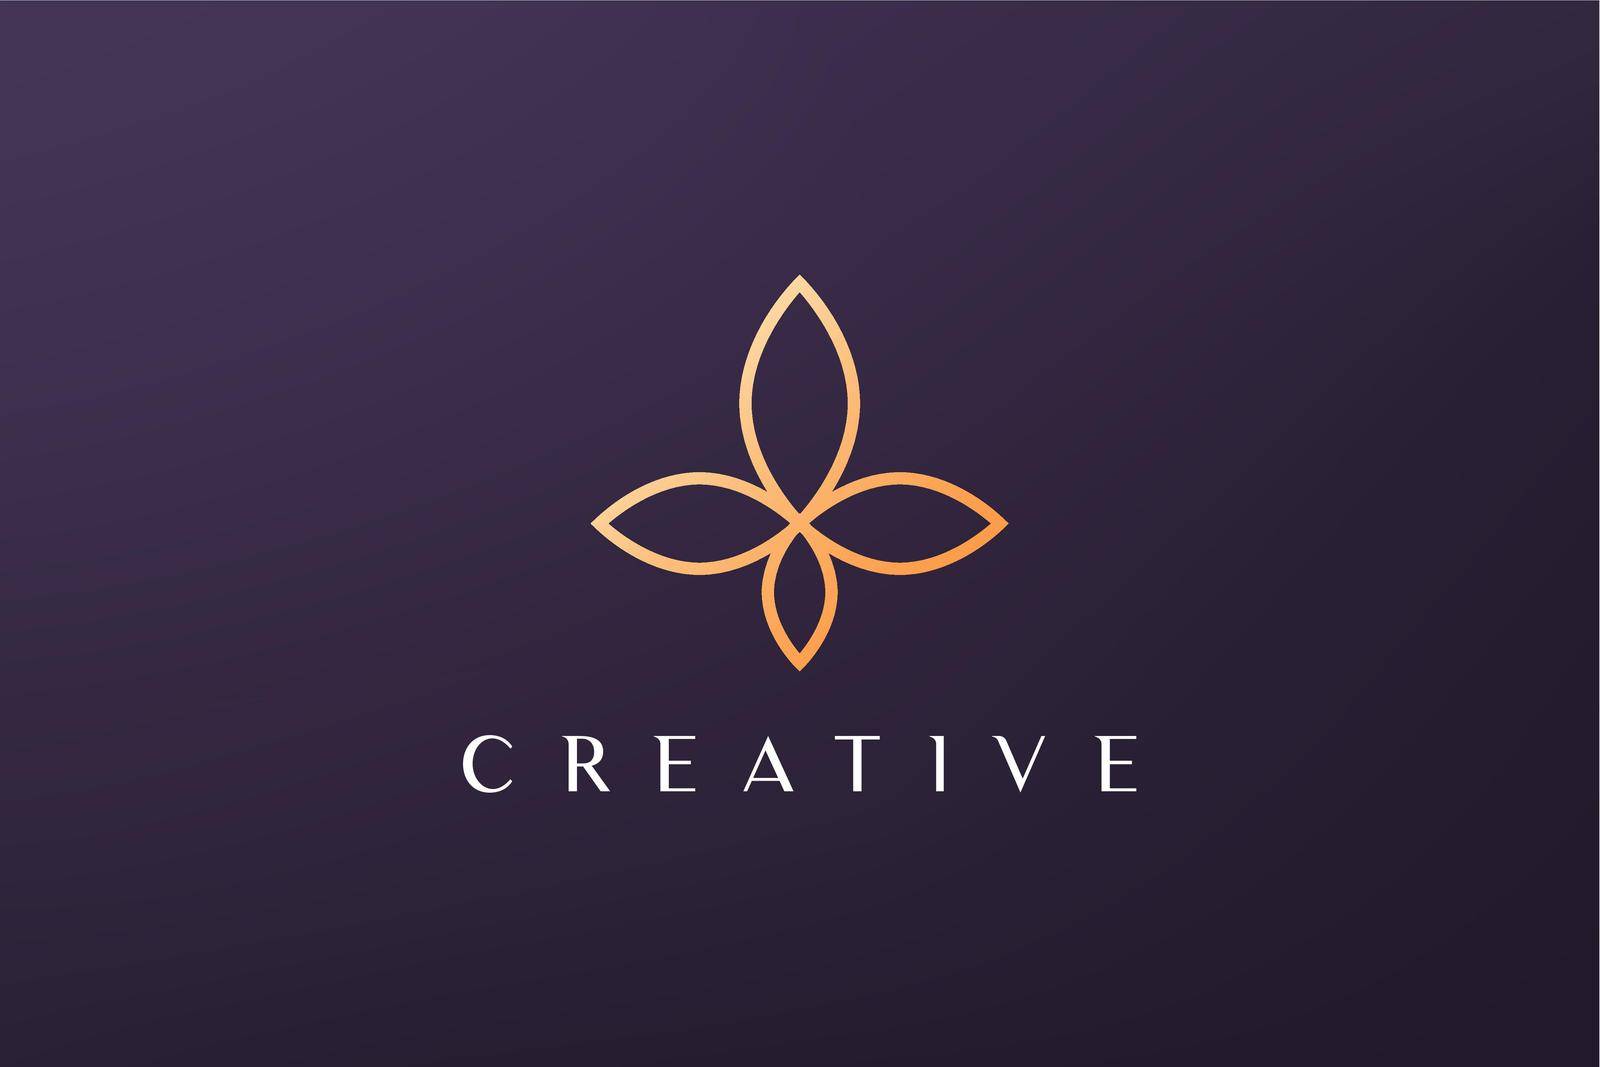 gold leaf luxury flower logo in simple shape with modern style by murnifine